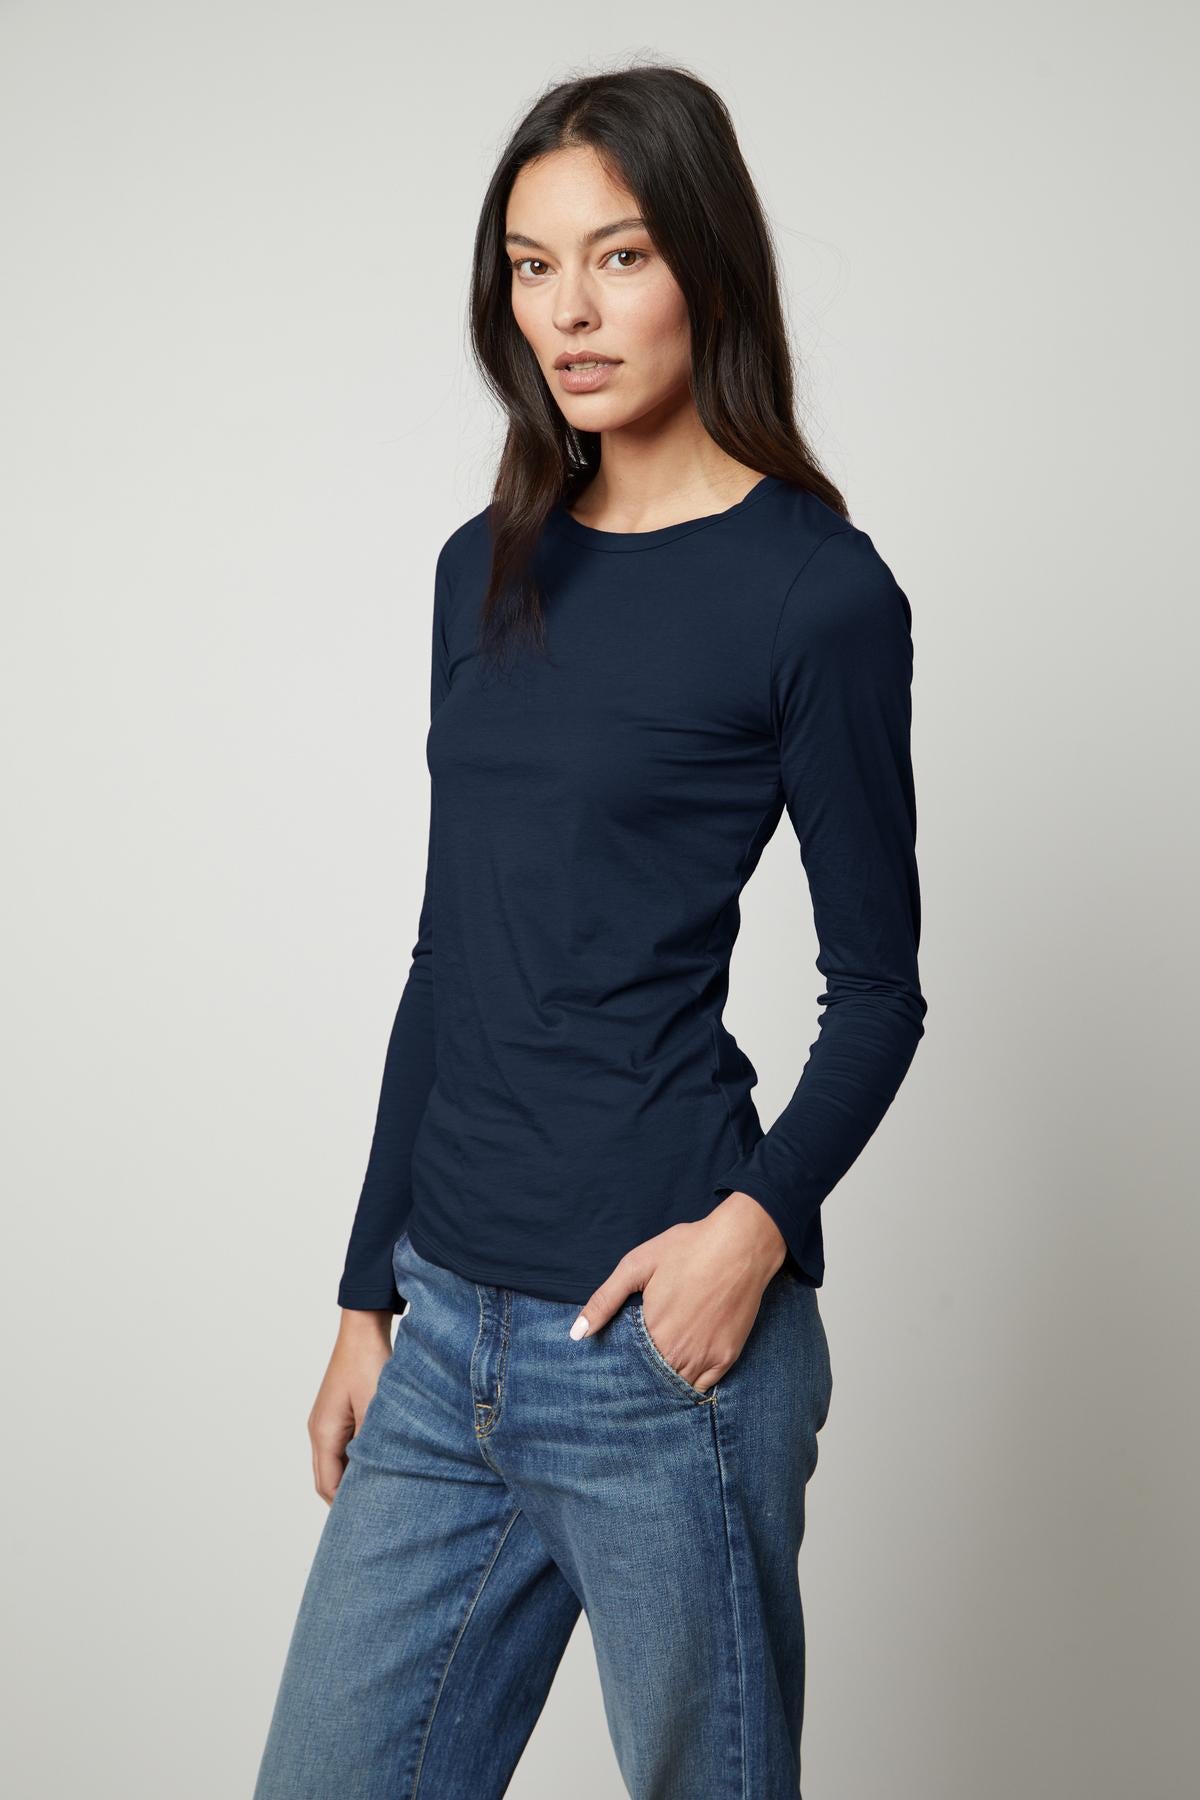 The ZOFINA gauzy whisper fitted crew neck tee by Velvet by Graham & Spencer in navy features a crew neck.-35503490957505